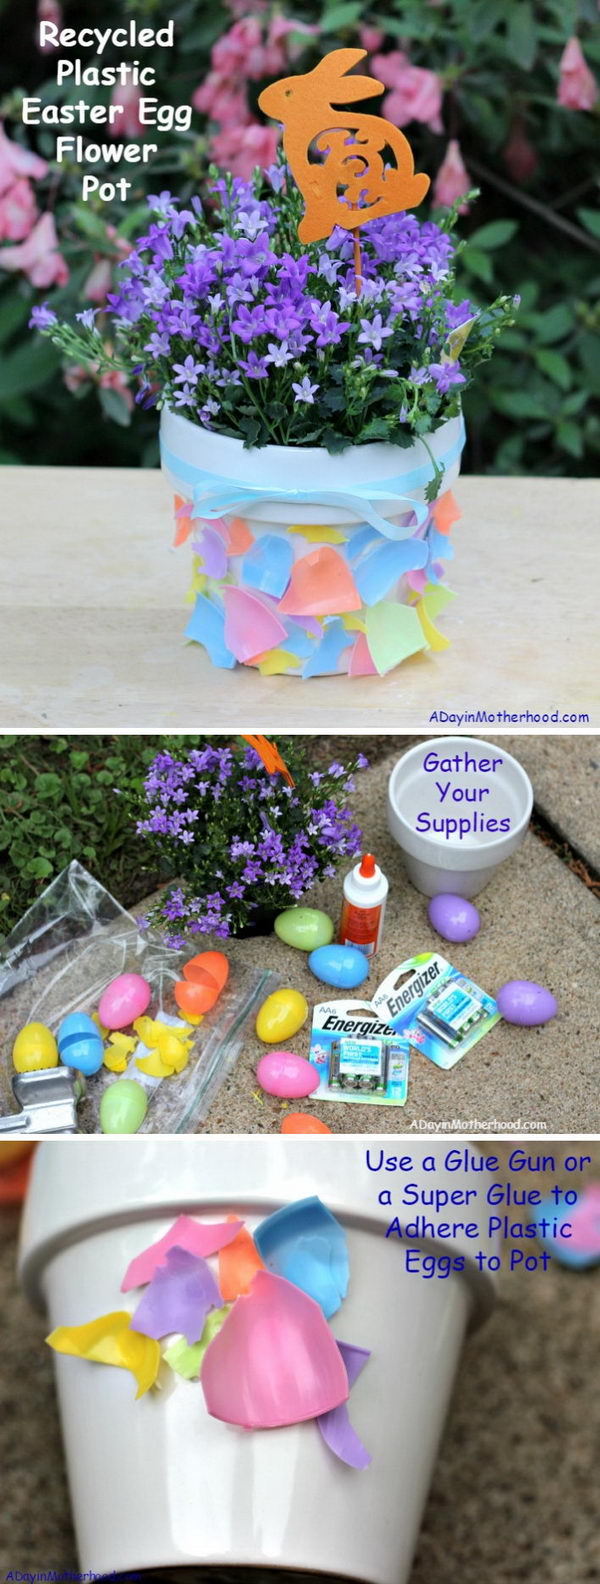 Easter egg flowerpot made from recycled plastic. 